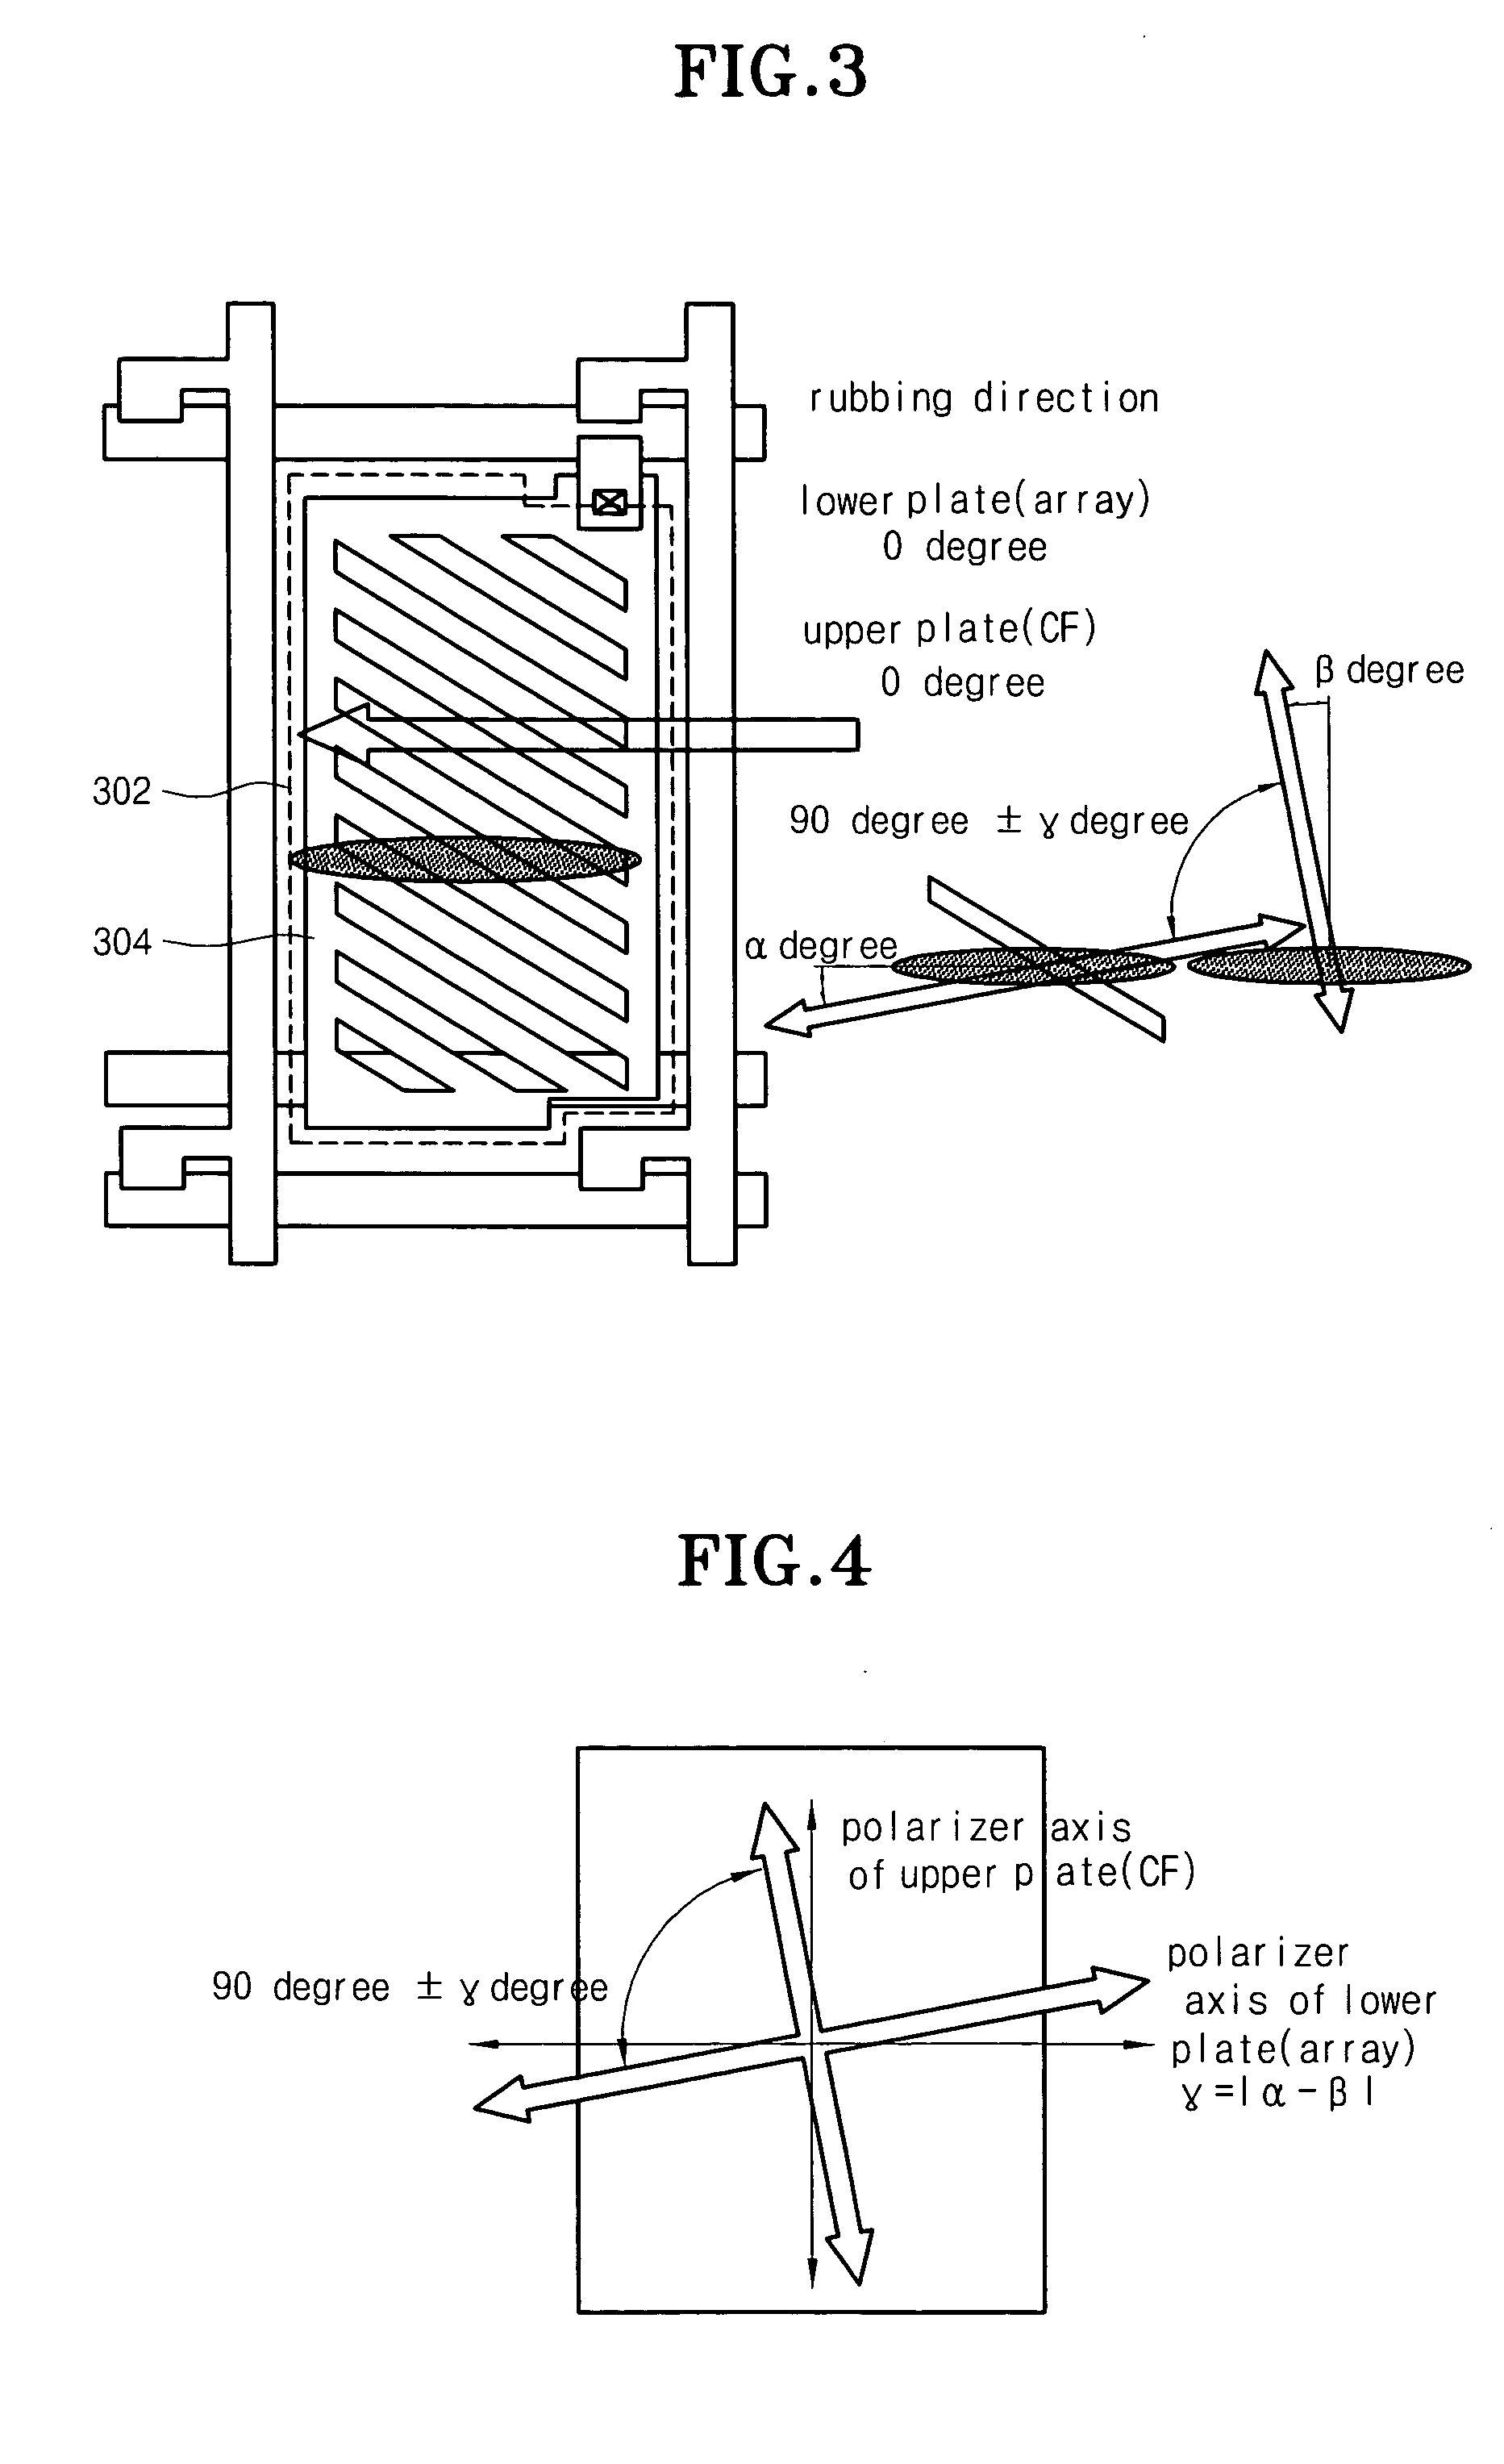 Method for aligning polarizer and rubbing axes in liquid crystal display